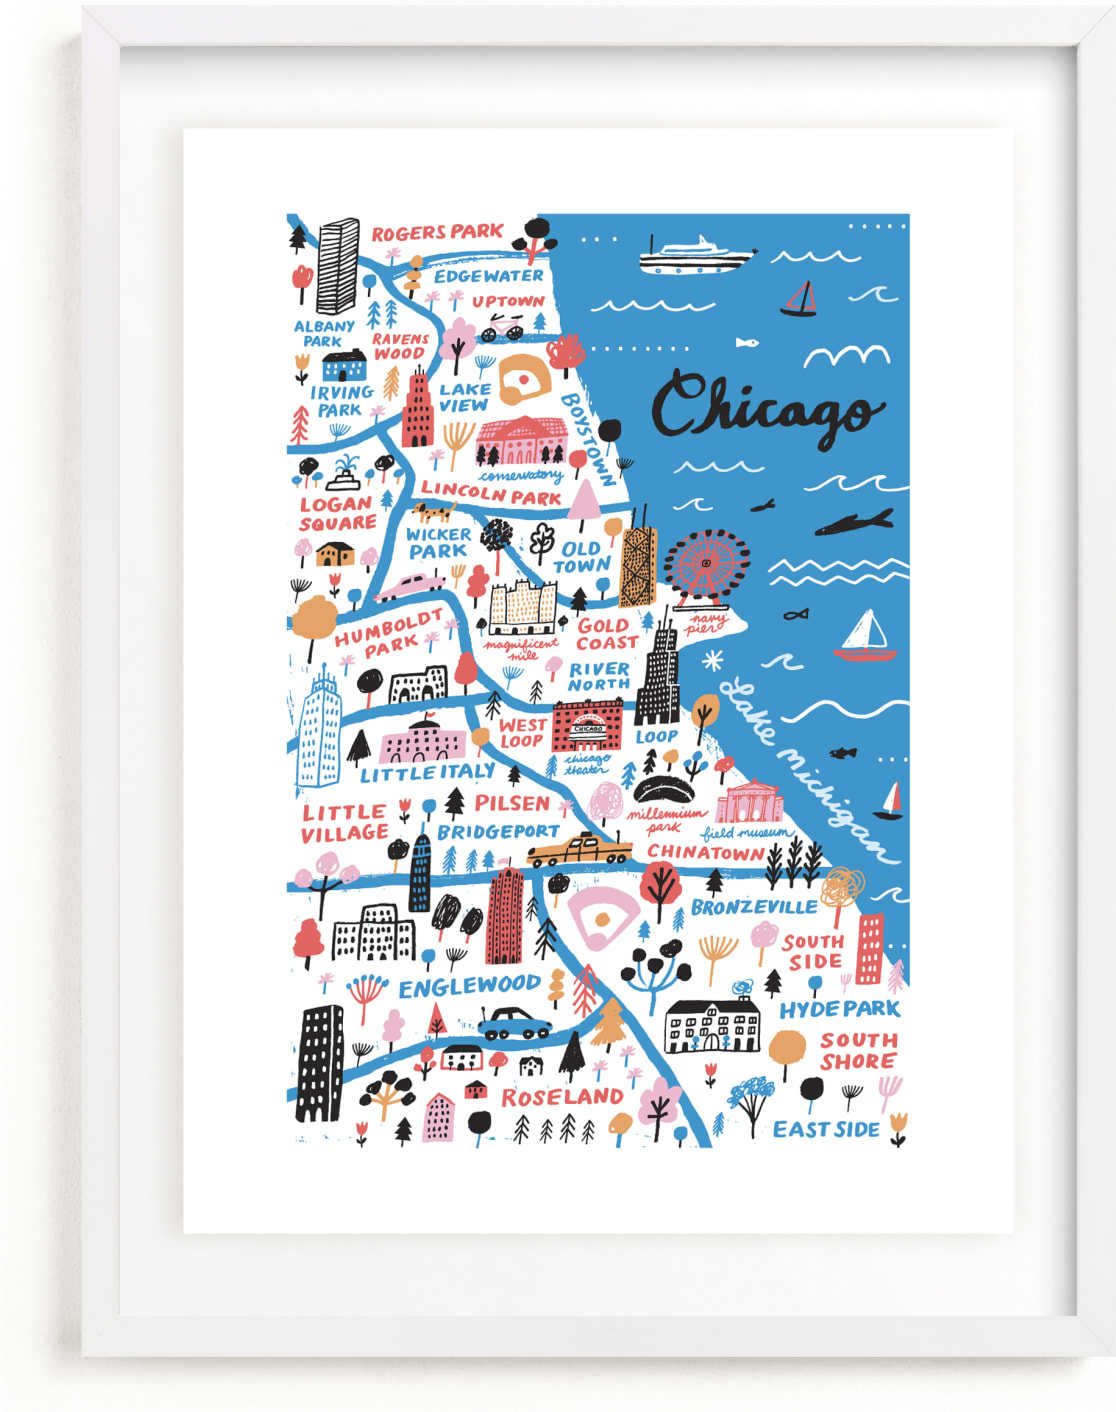 This is a blue, colorful art by Jordan Sondler called I Love Chicago.